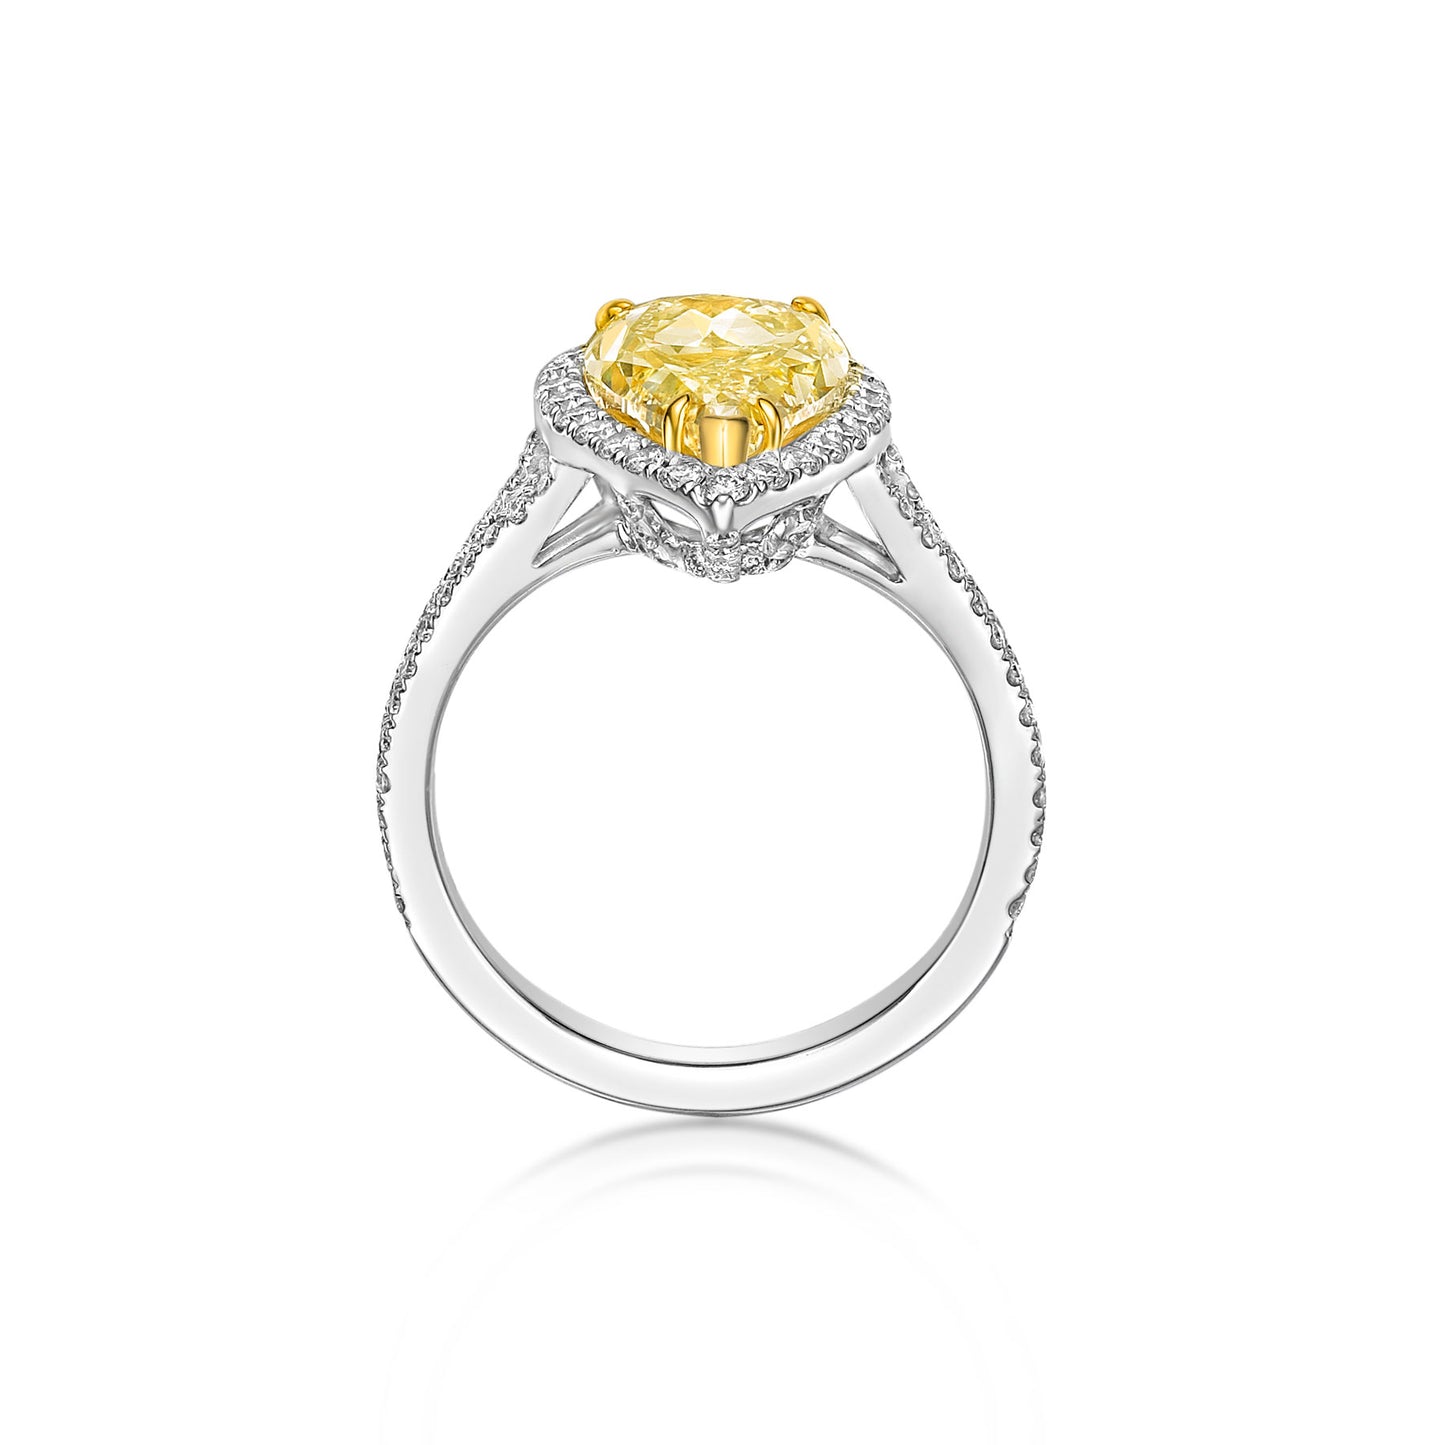 3ct Fancy-Intense Yellow Natural Diamond in an 18K White Gold Diamond Halo Engagement ring setting with custom basket detailing